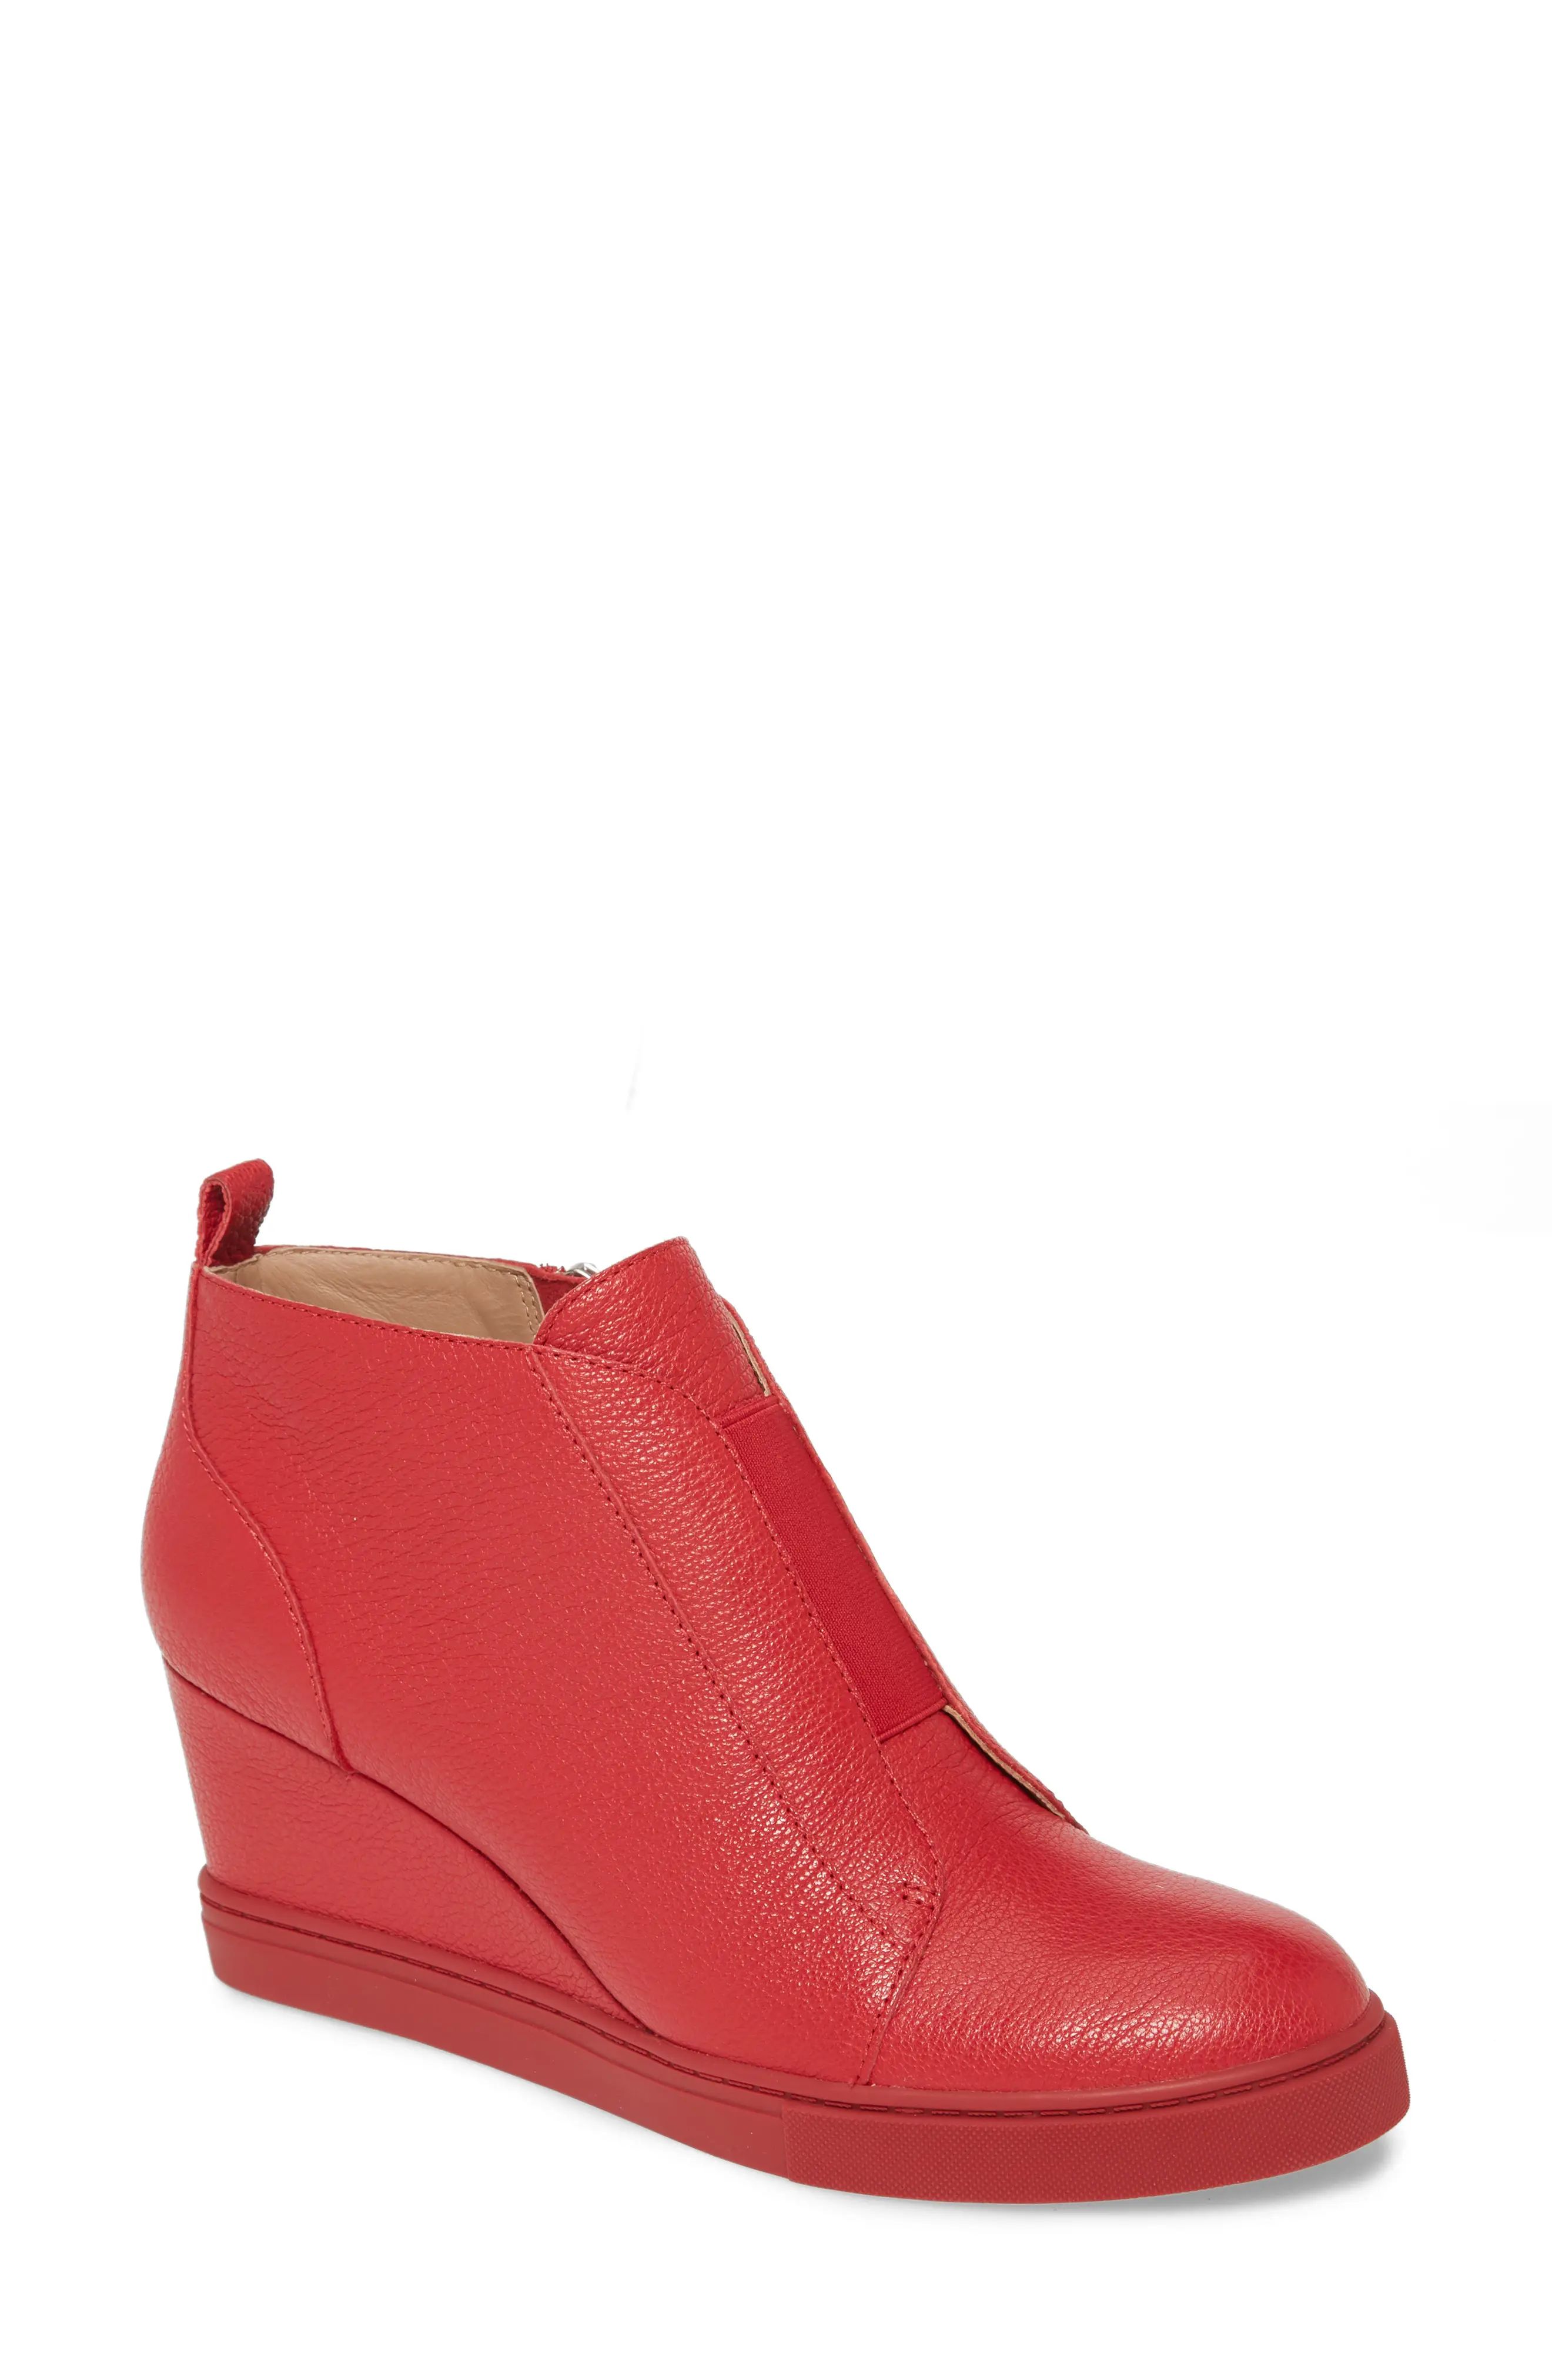 Linea Paolo Felicia Wedge Sneaker in Red Leather at Nordstrom, Size 5 | Nordstrom